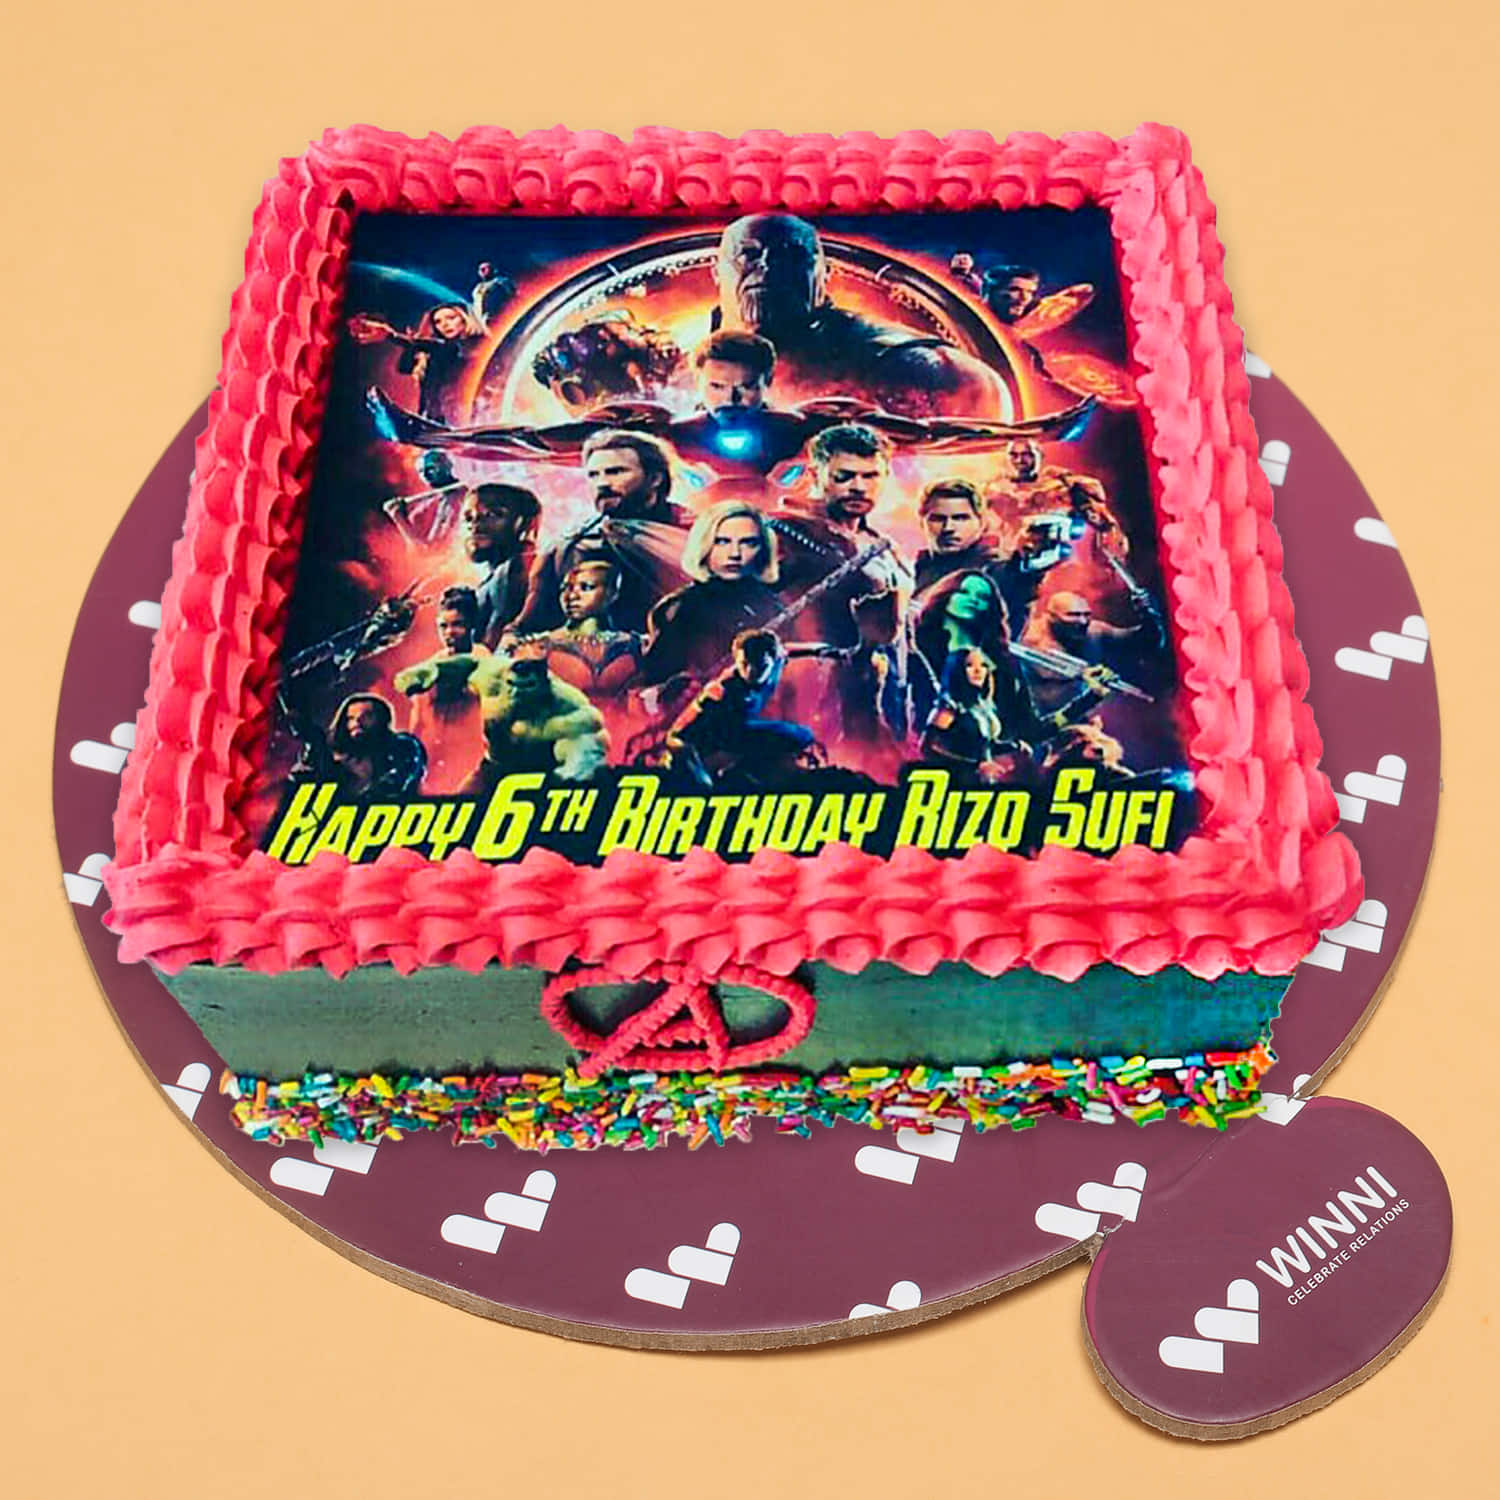 Avengers Square Cream Cake Delivery in Delhi NCR - ₹1,999.00 Cake Express